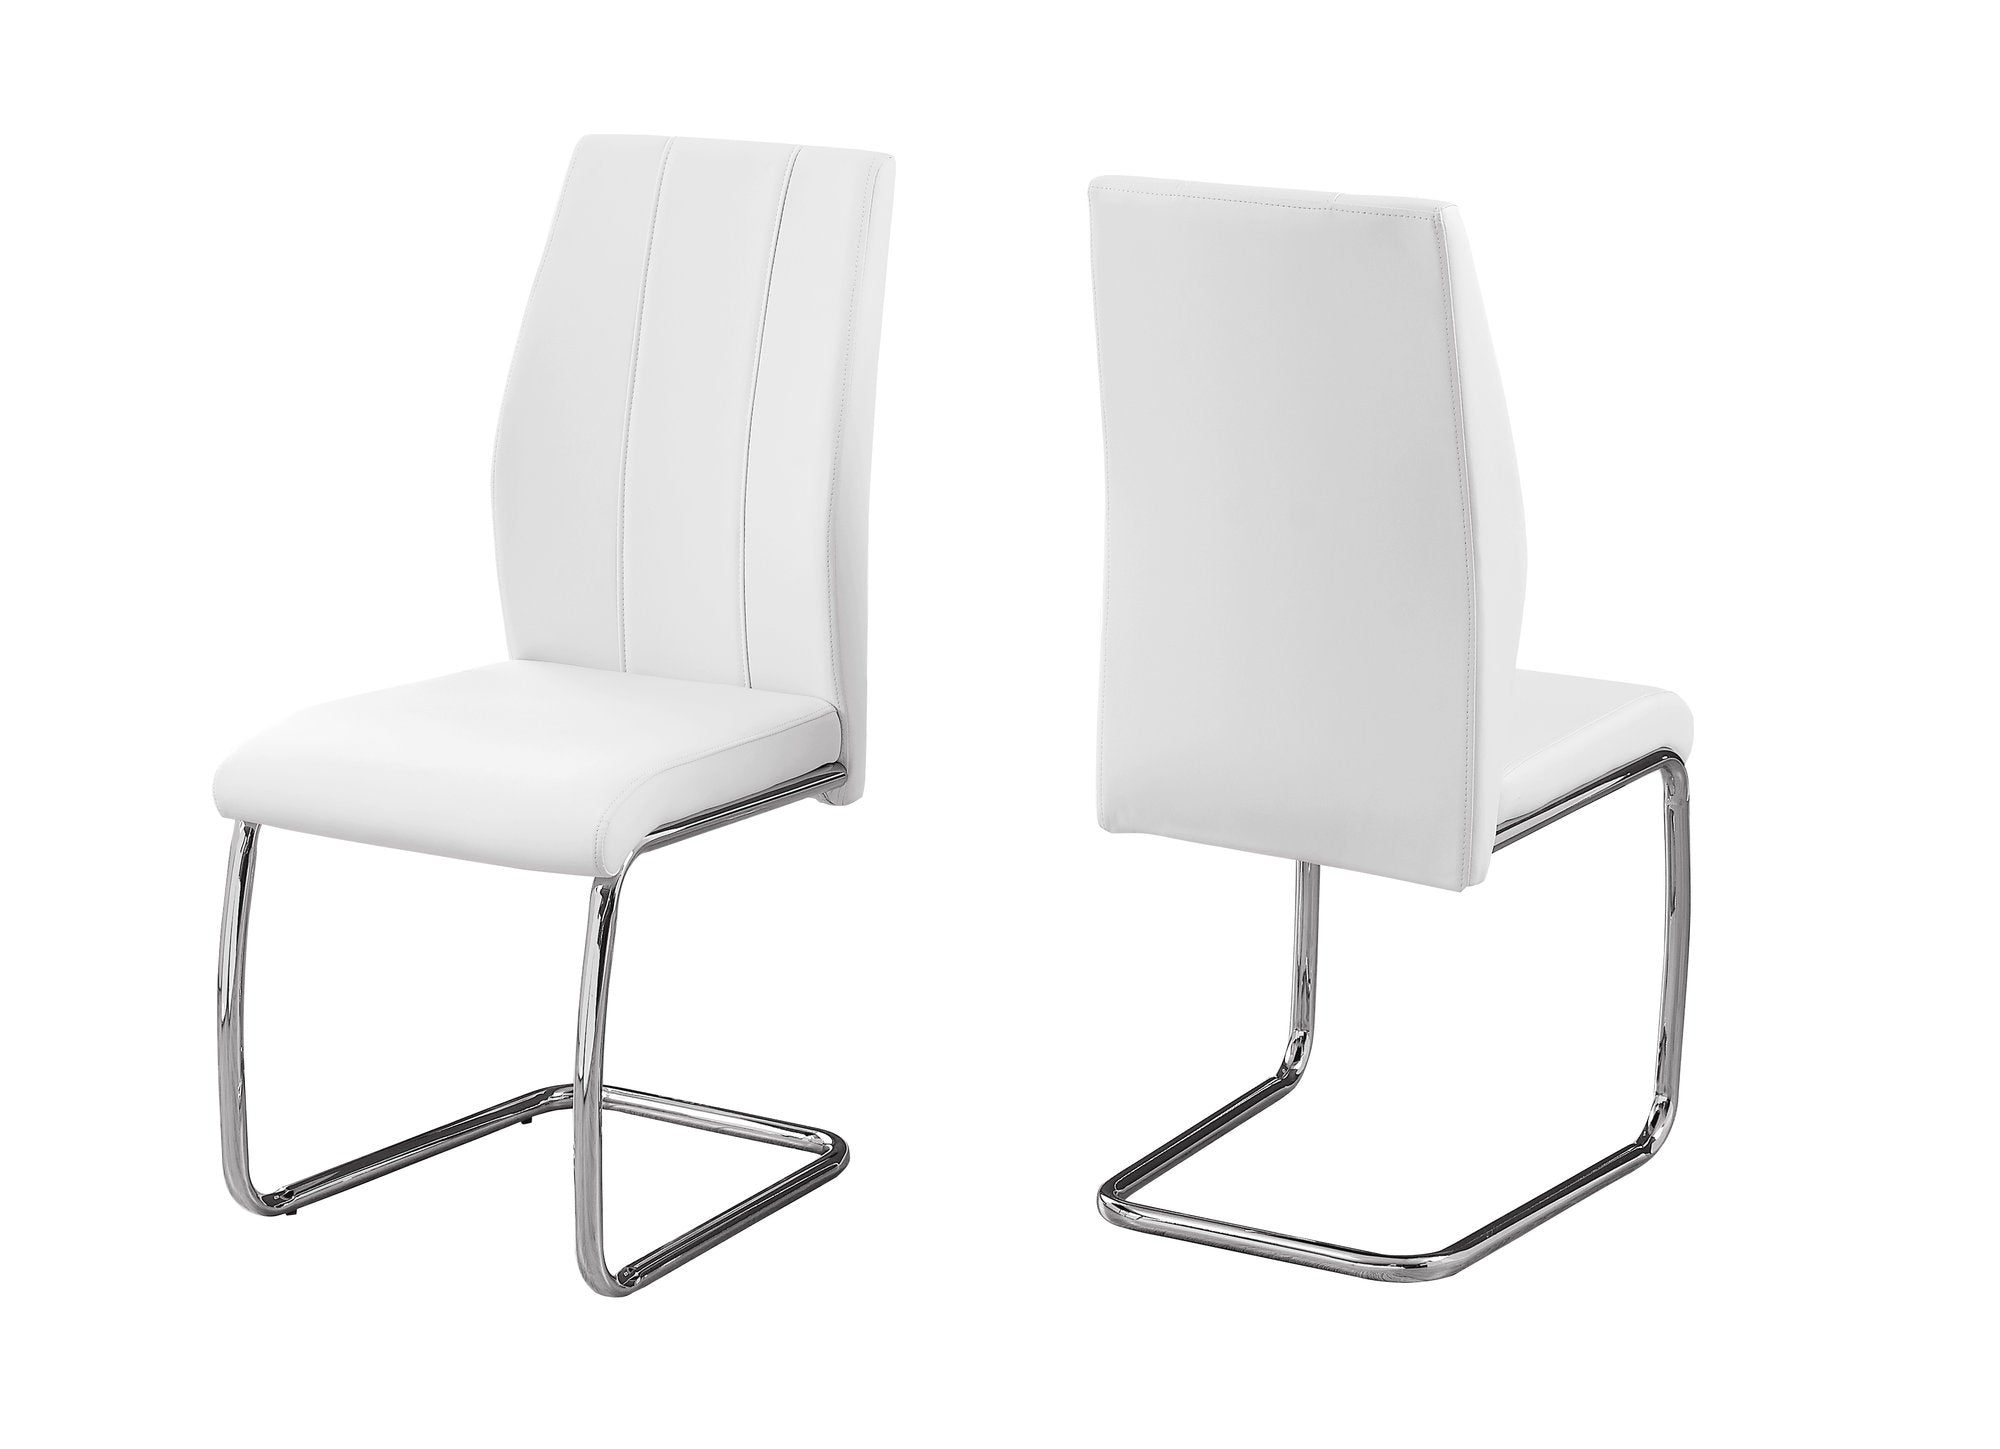 Wyne Leather Dining Chair (Set of 2 - White)